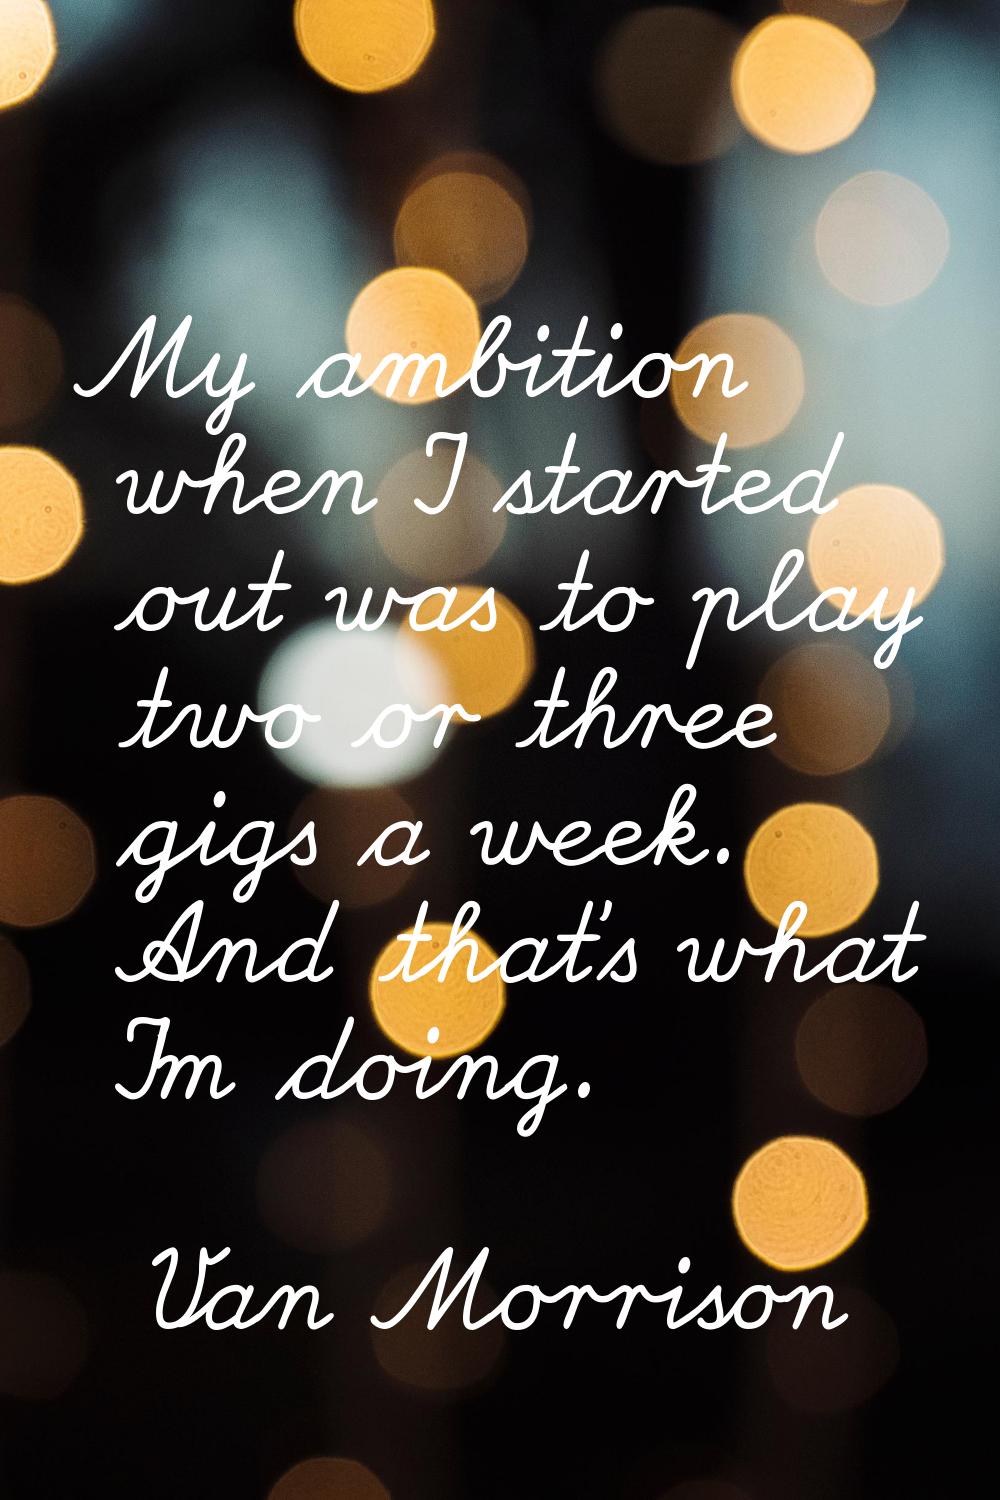 My ambition when I started out was to play two or three gigs a week. And that's what I'm doing.